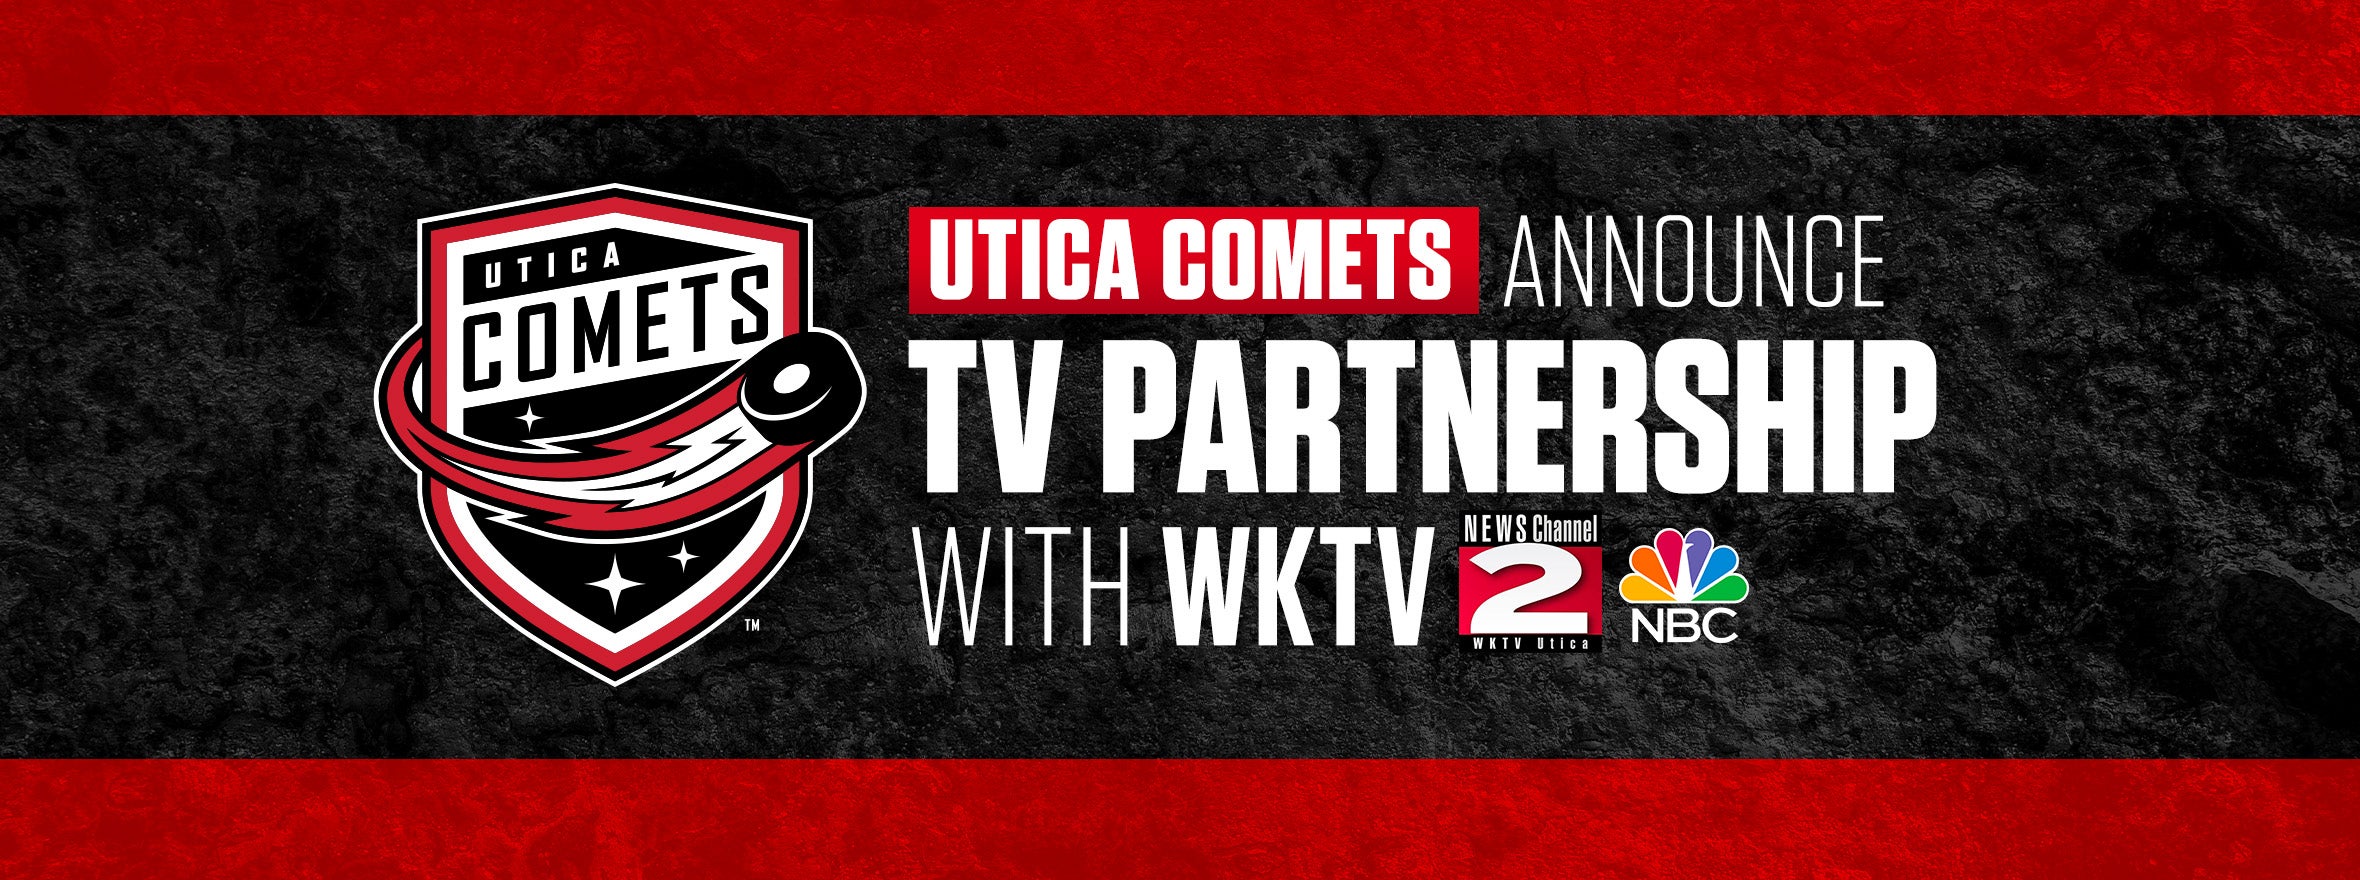 COMETS ANNOUNCE TELEVISION PARTNERSHIP WITH WKTV Utica Comets Official Website